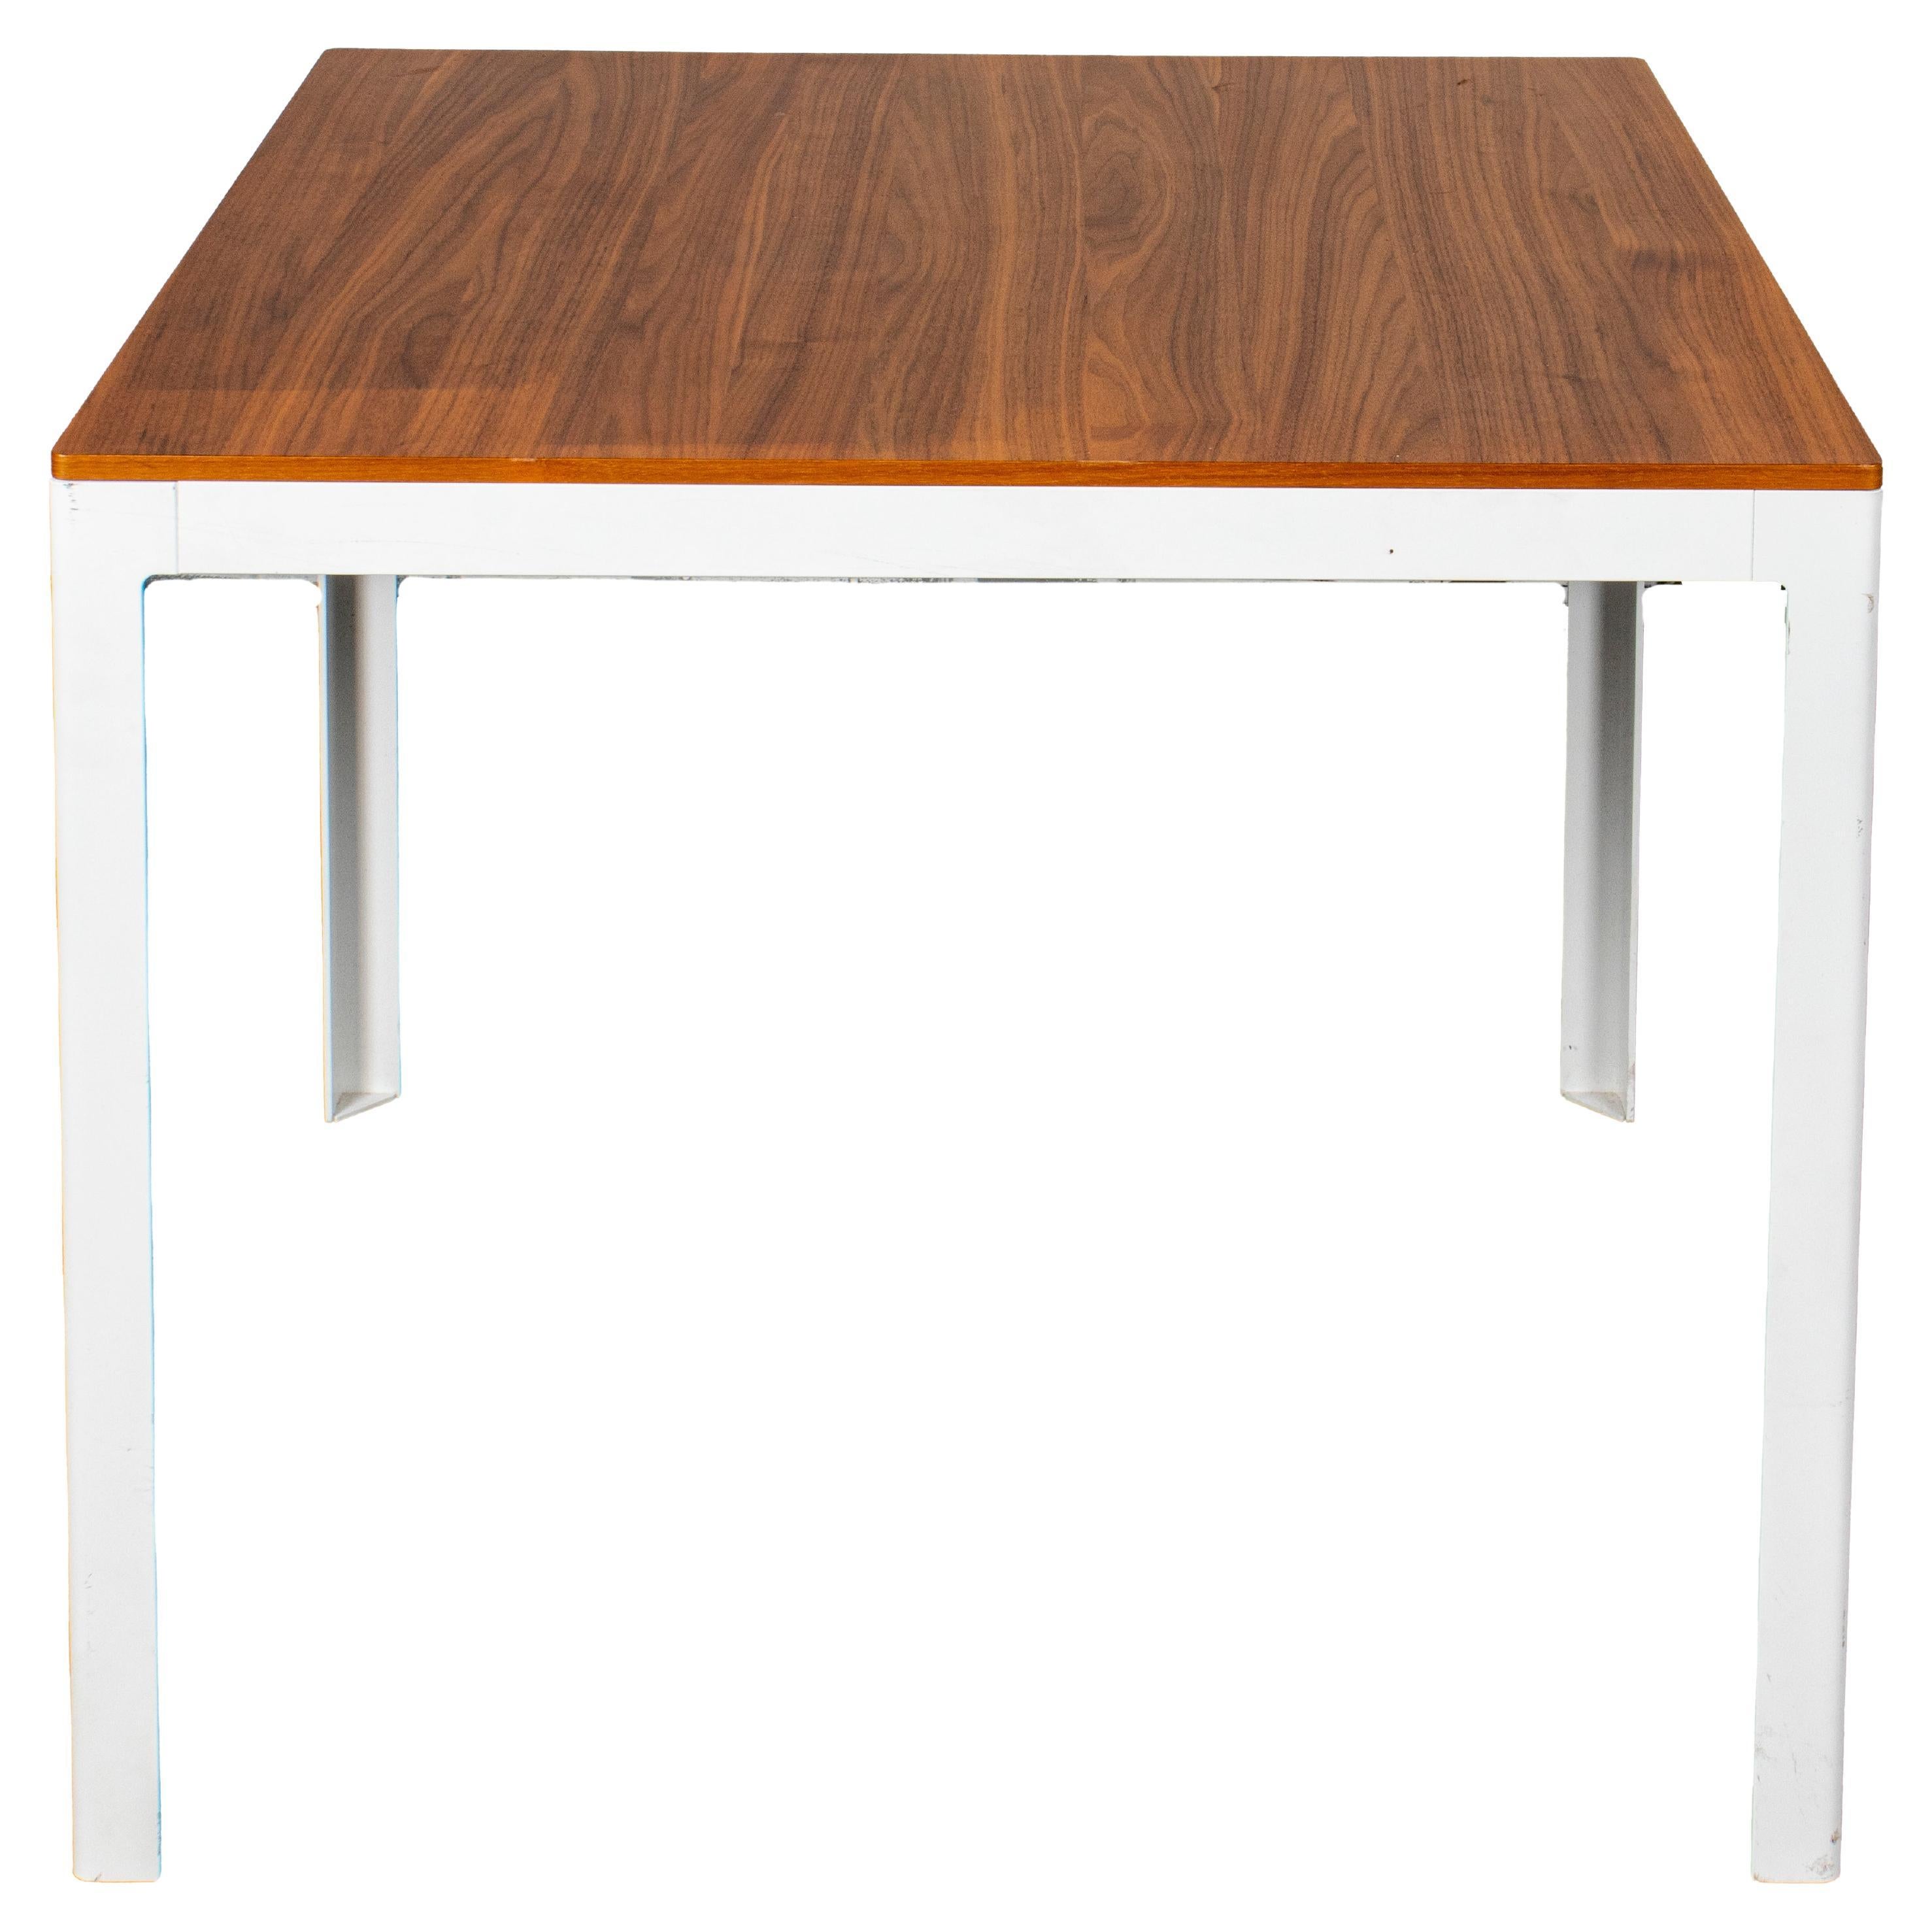 Modern Wood And Enameled Steel Table For Sale